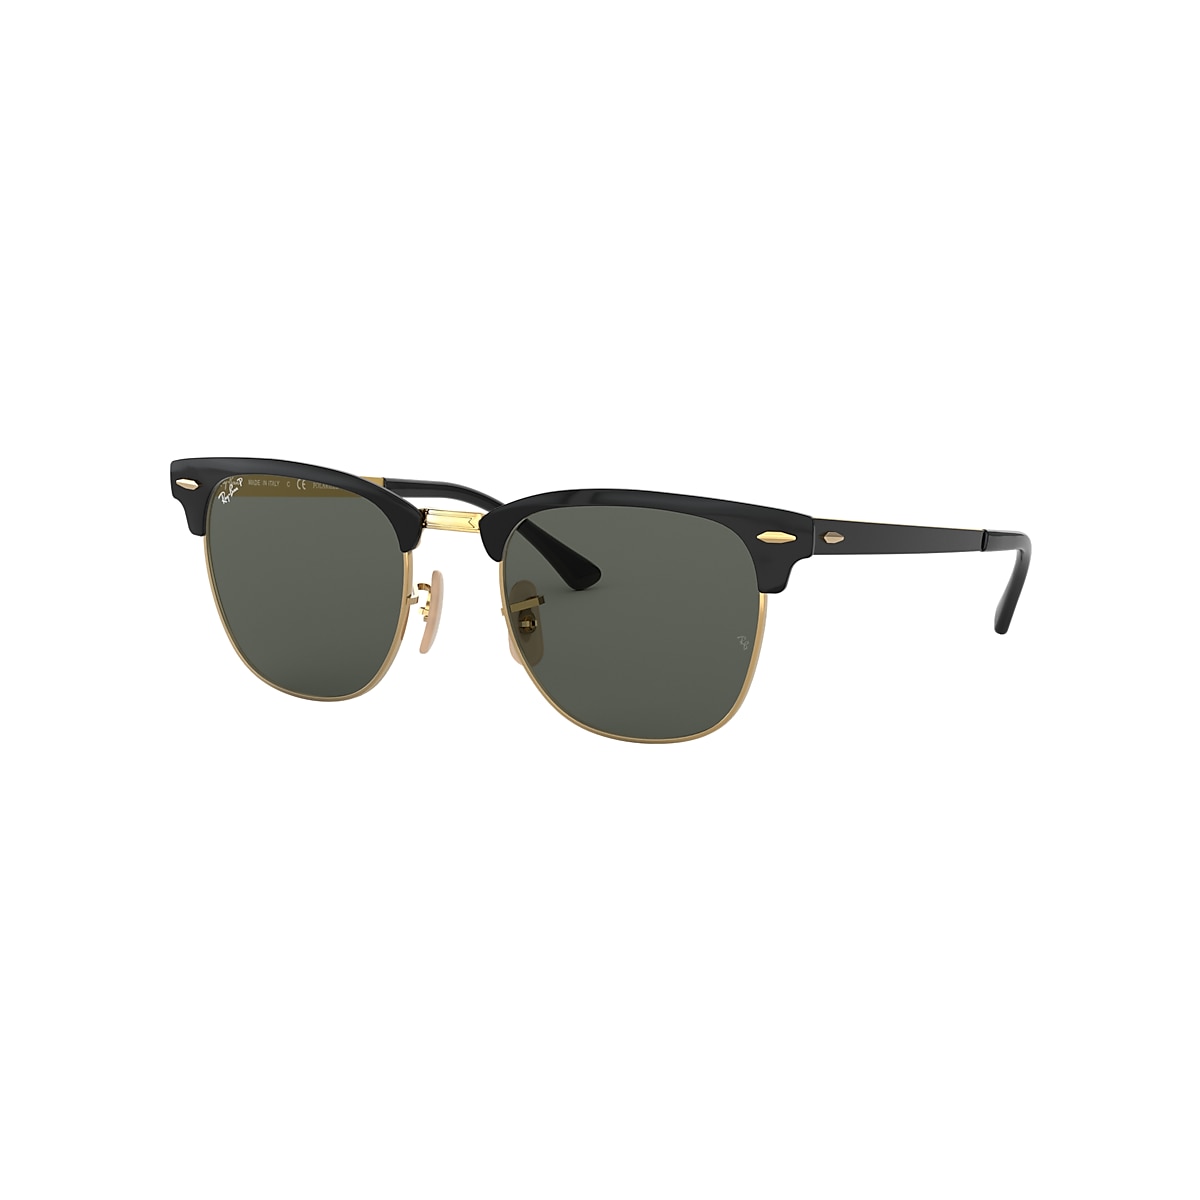 CLUBMASTER METAL Sunglasses in Black On Gold and Green - RB3716 